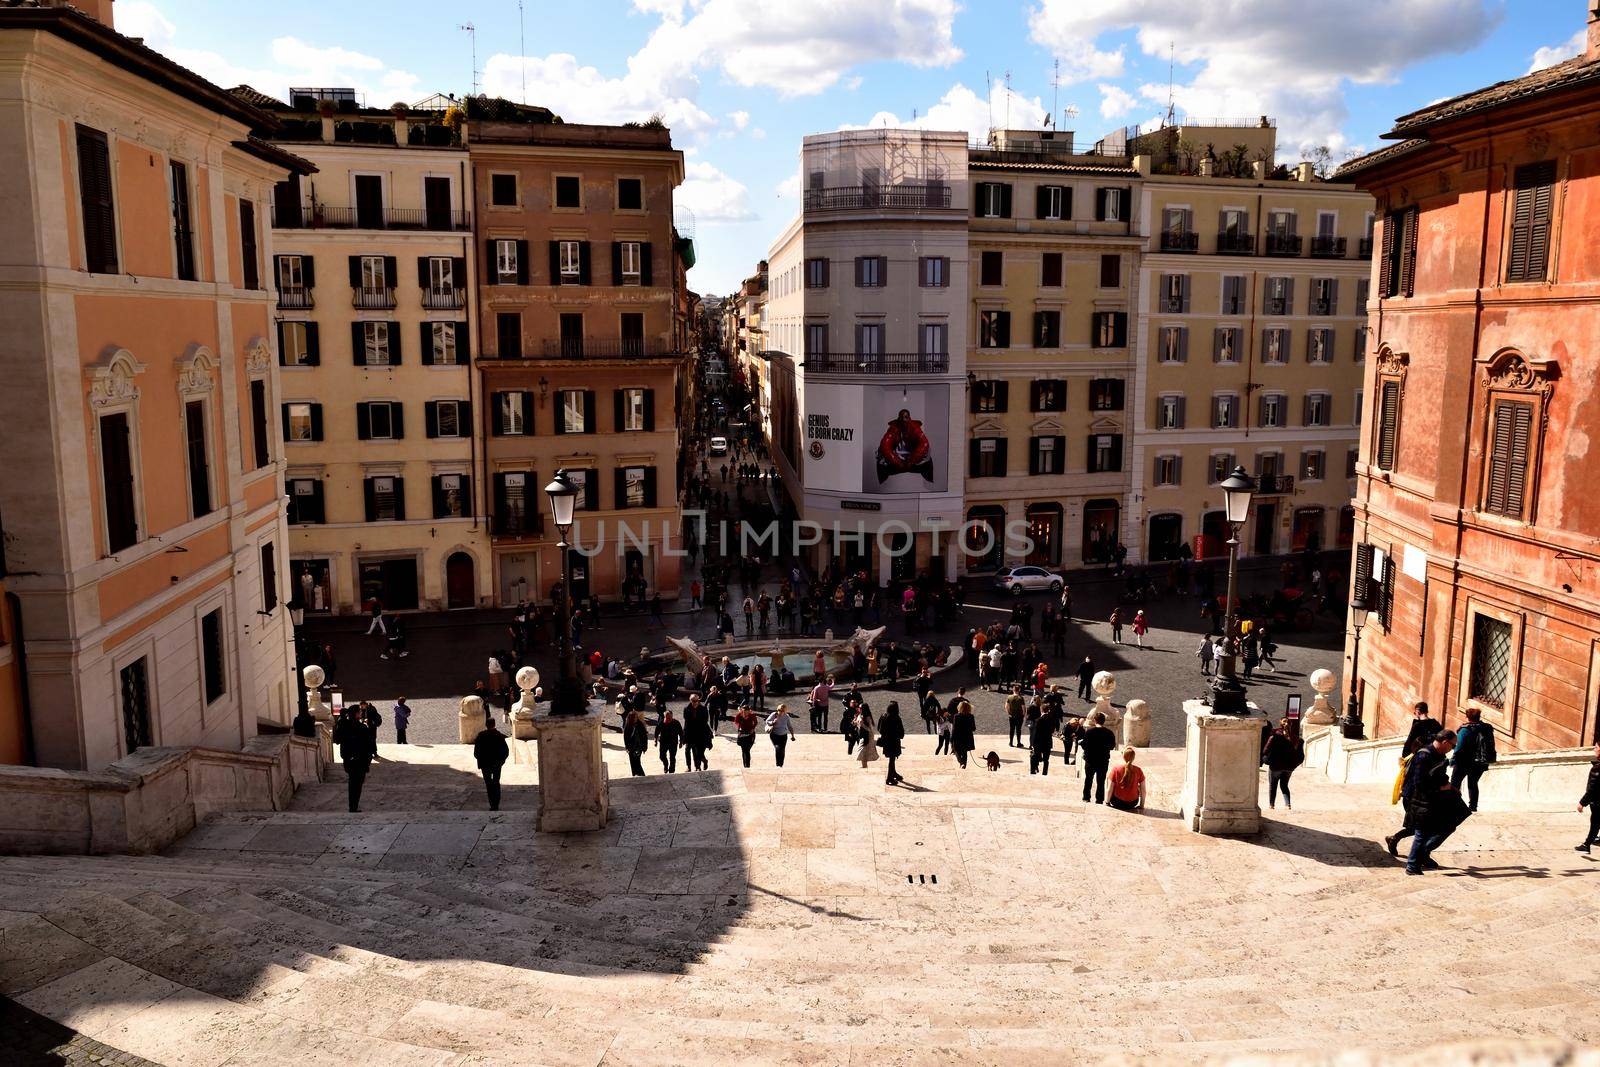 March 8th 2020, Rome, Italy: View of Piazza di Spagna with few tourists because of the coronavirus epidemic